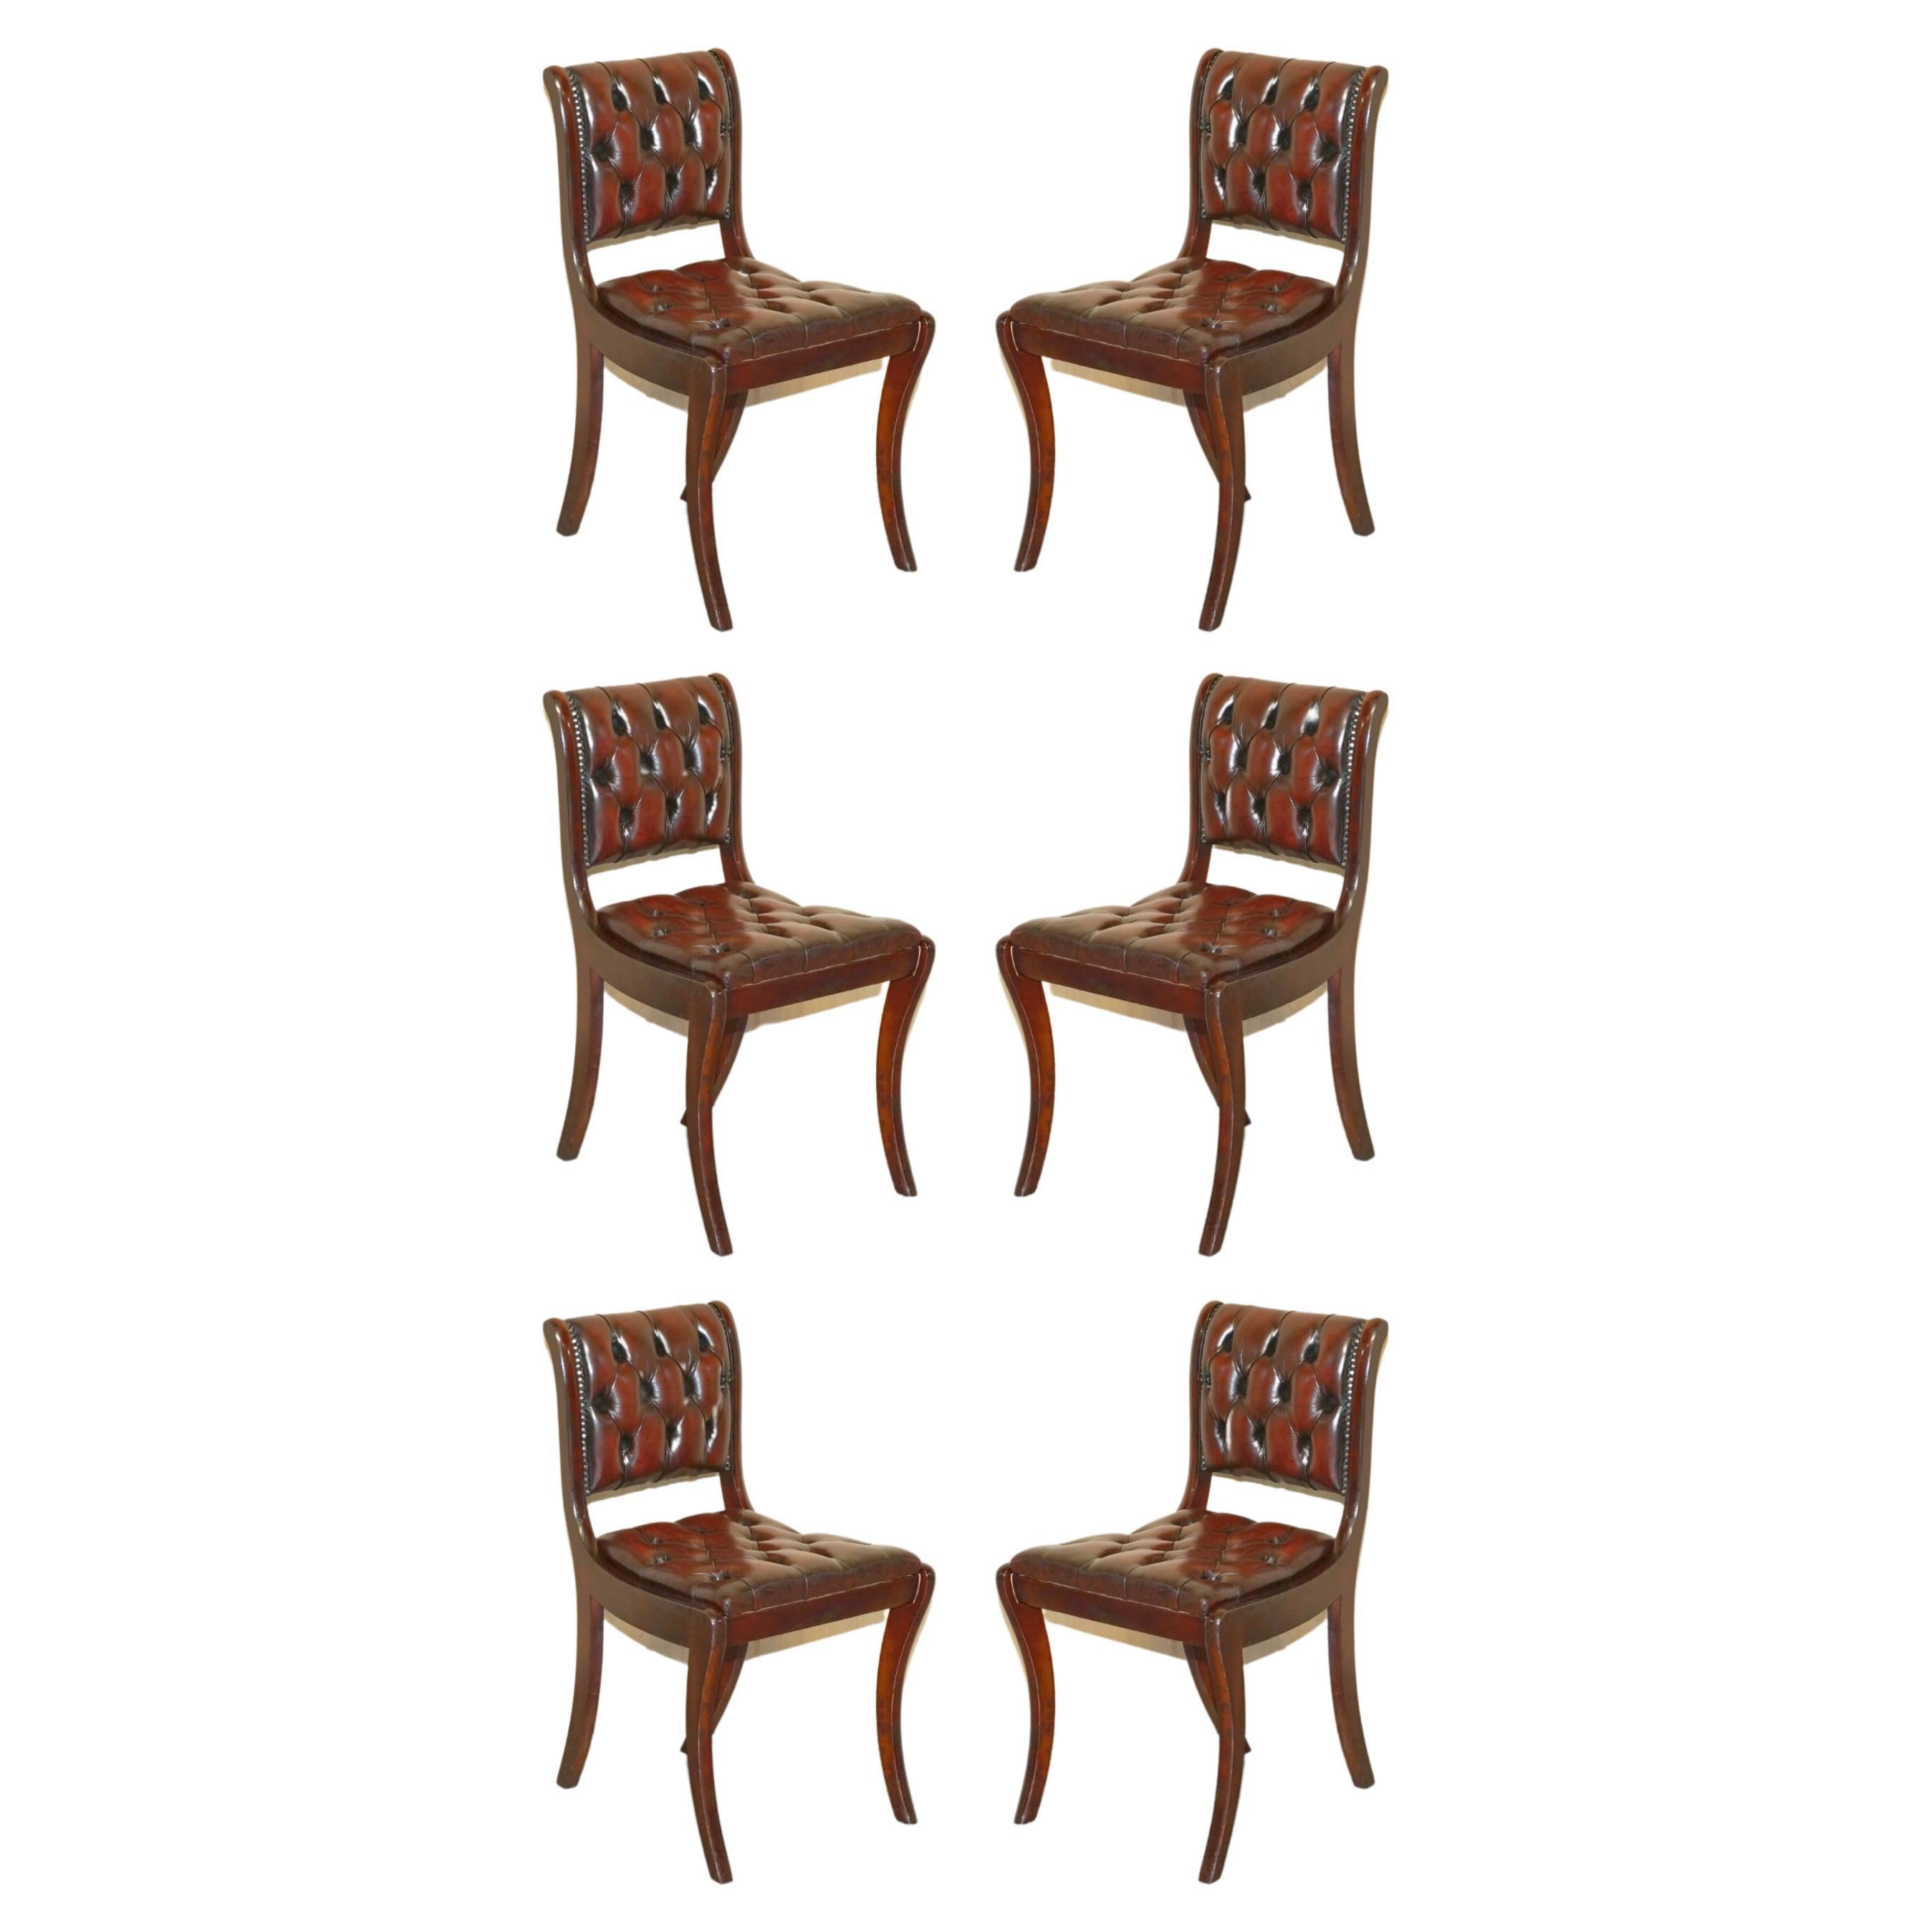 SIX VINTAGE HARDWOOD FULLY RESTORED CHESTERFIELD OXBOOD LEATHER DiNING CHAIRS 6 For Sale